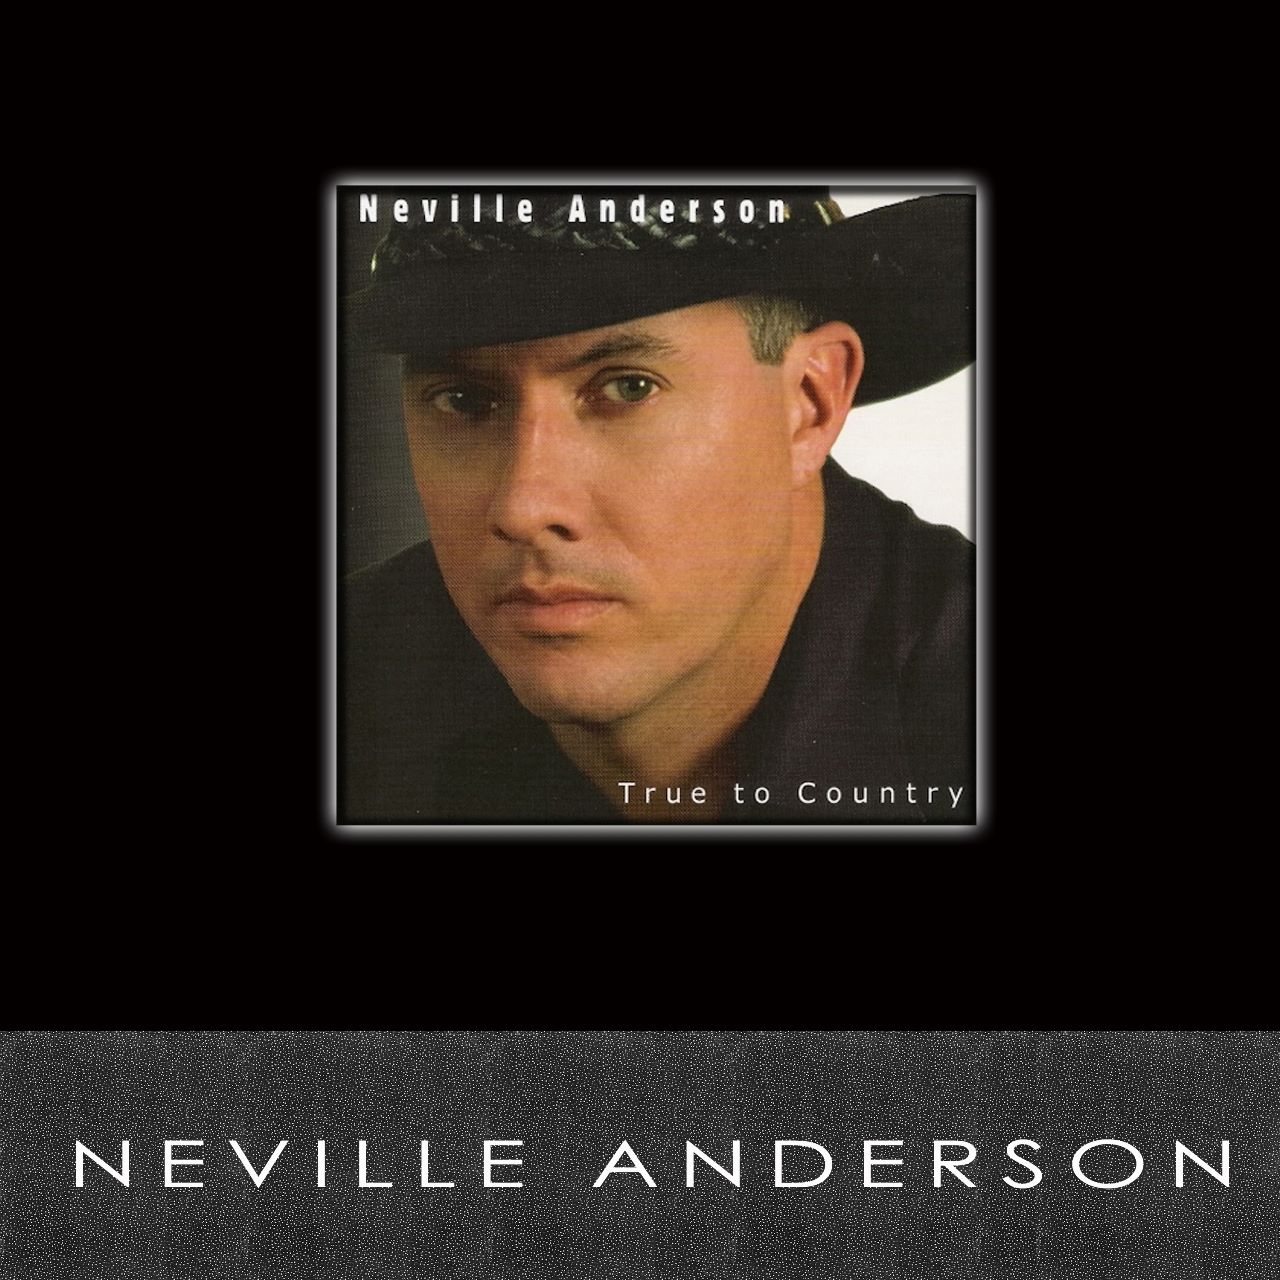 Neville Anderson - True To Country cover album